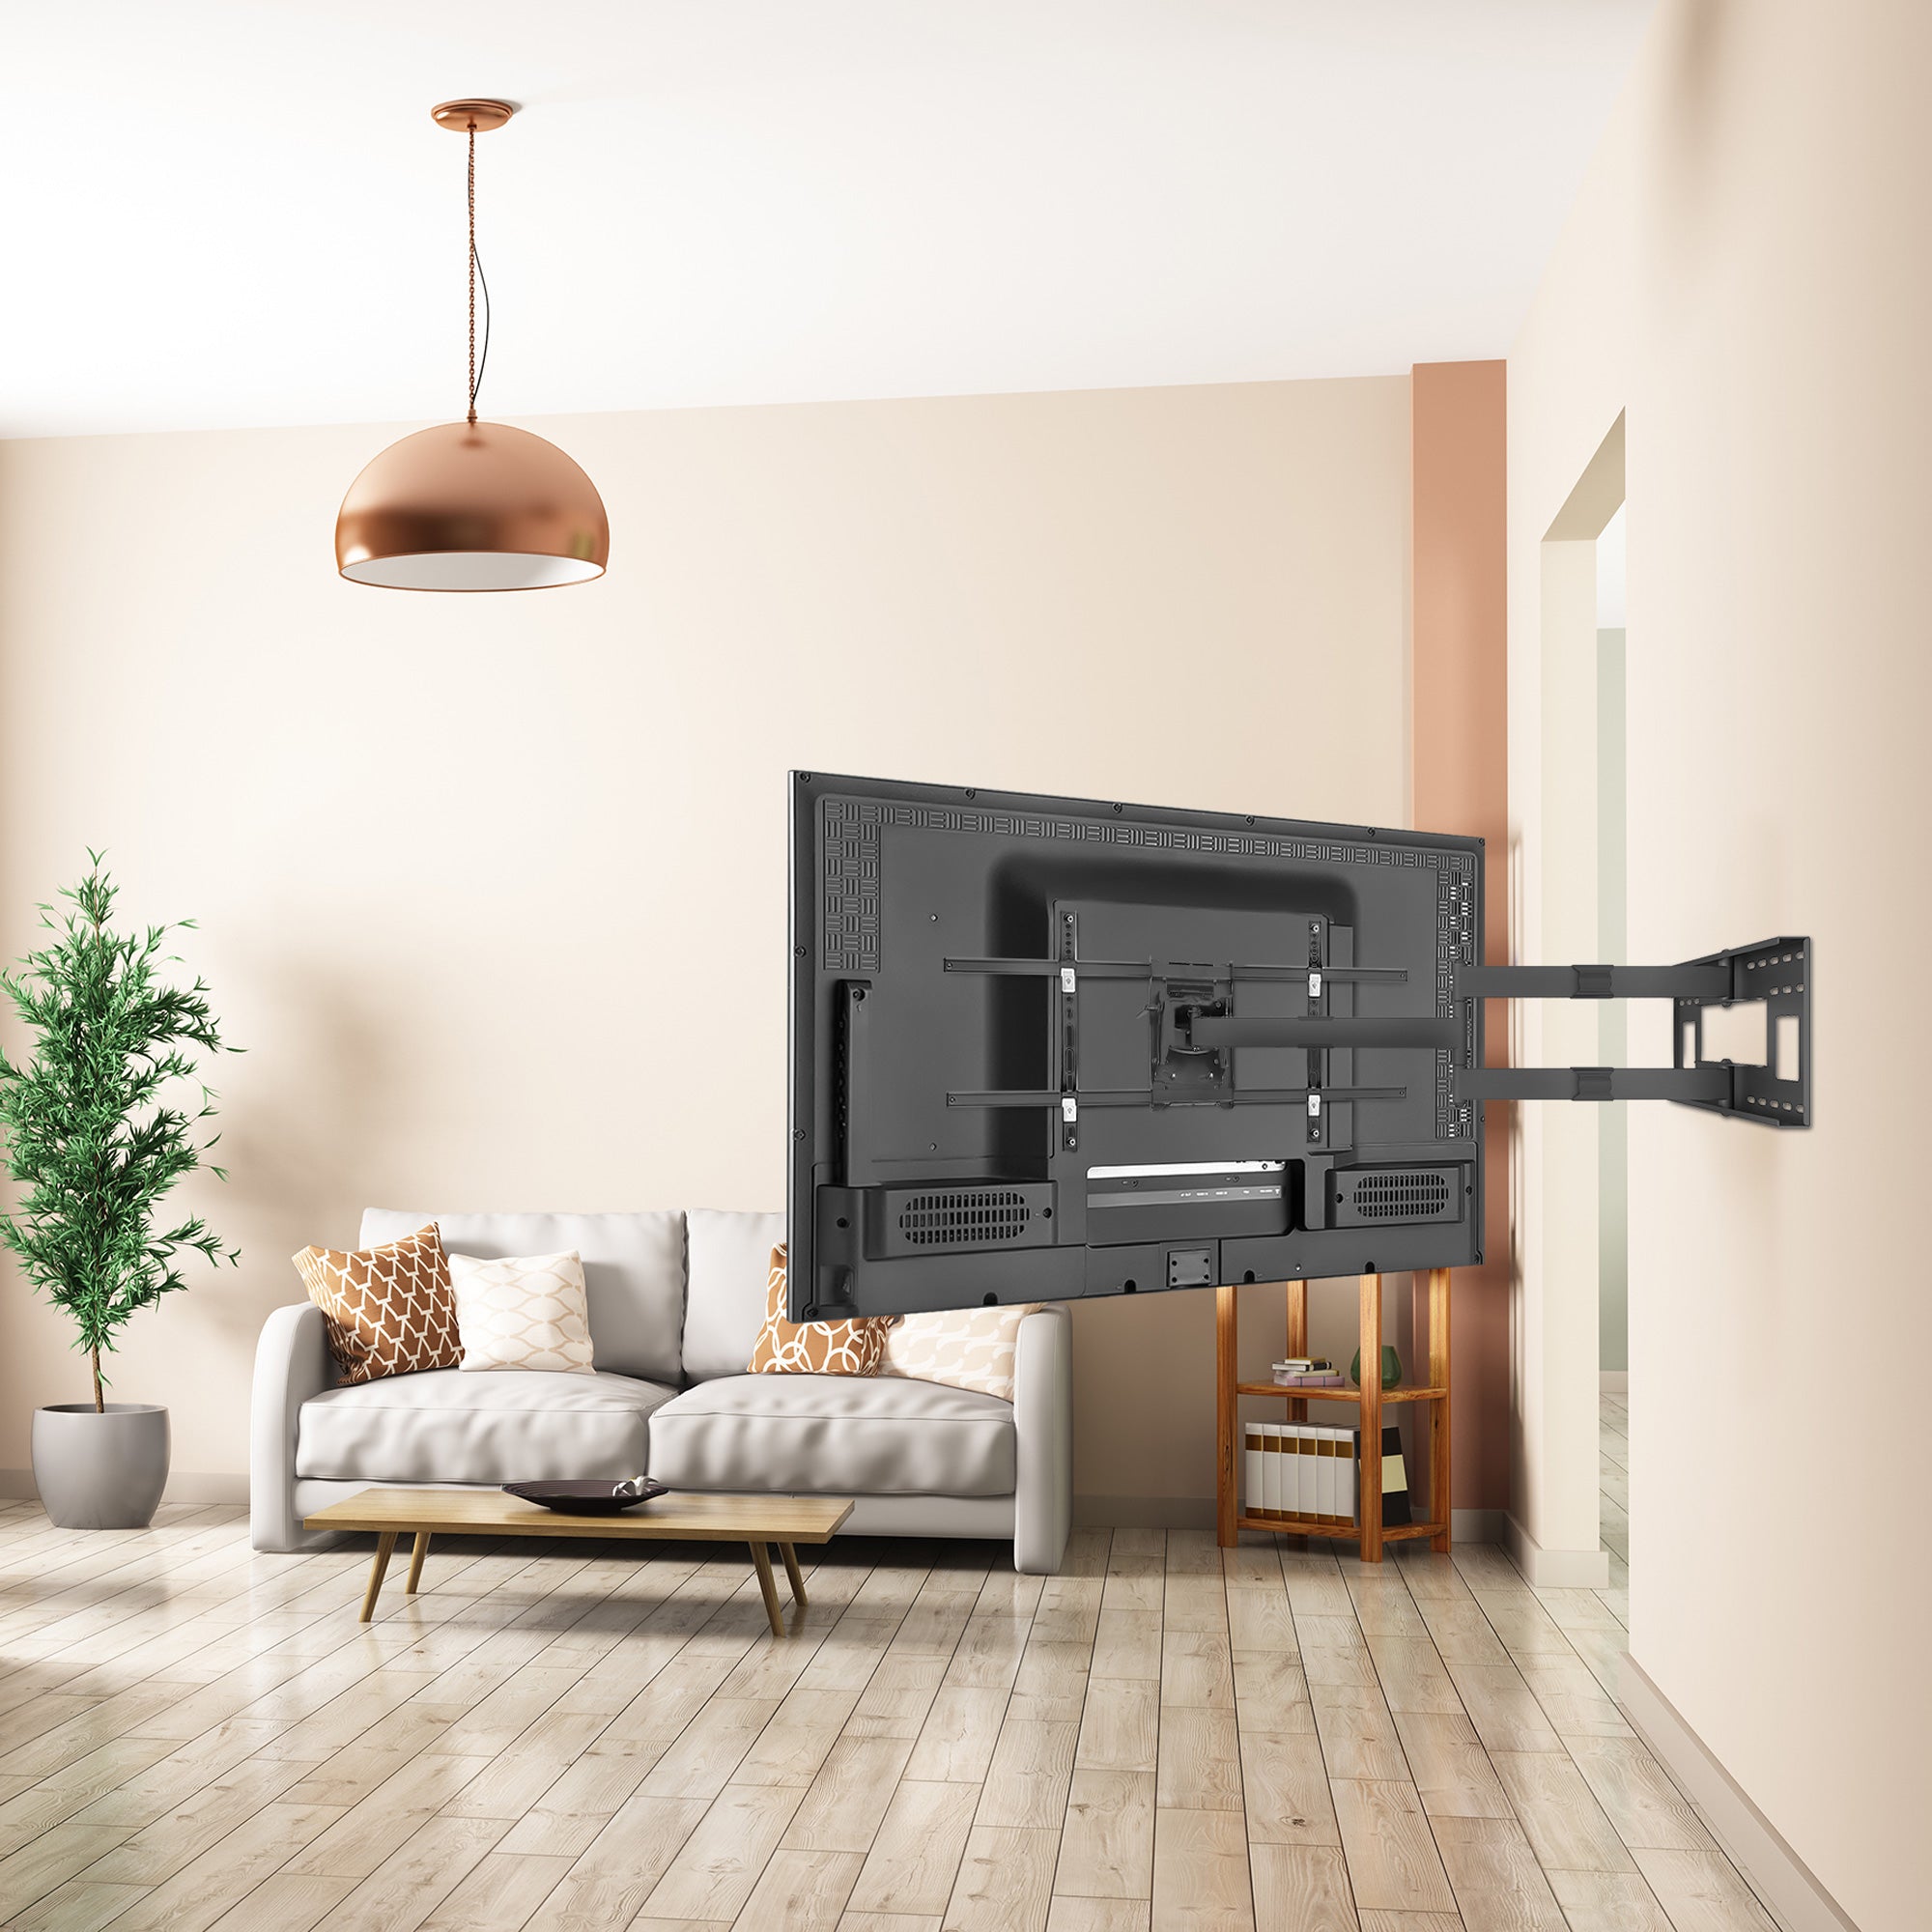 Do You Need An Articulating TV Wall Mount?